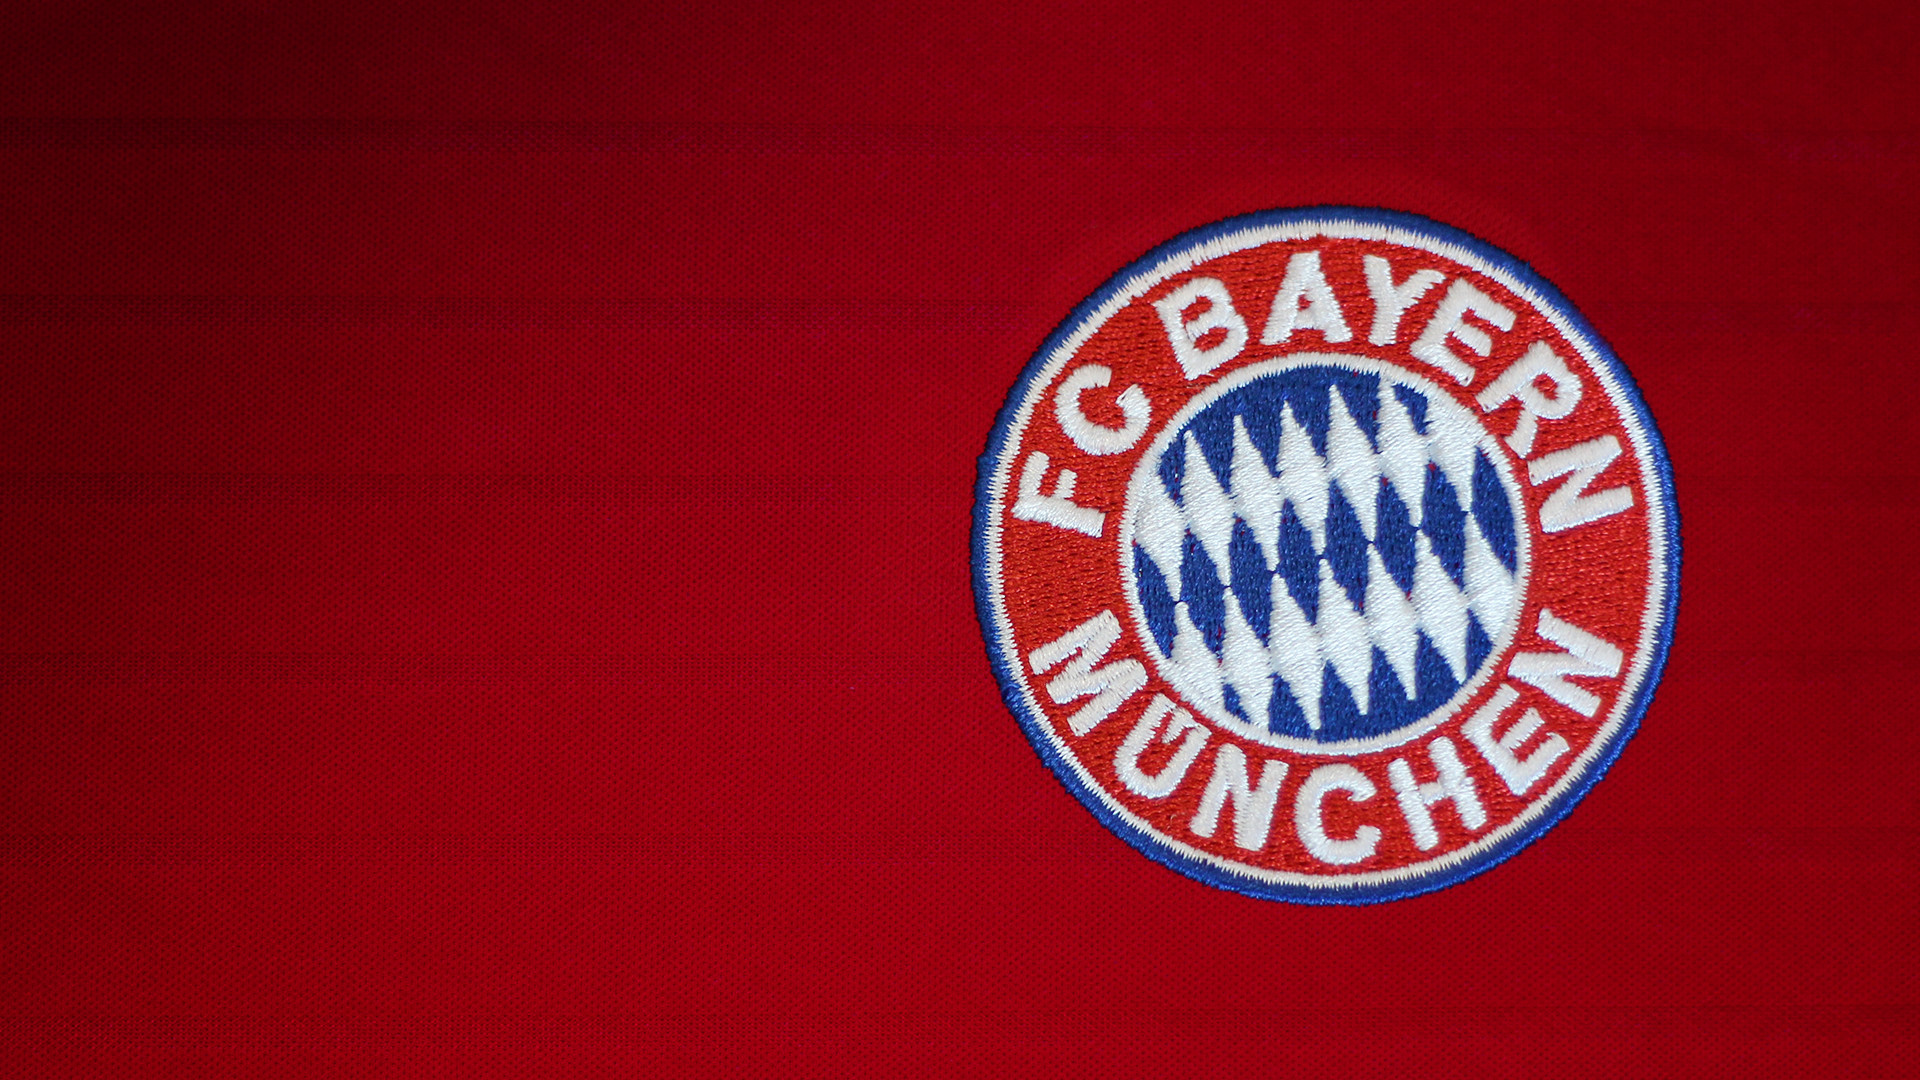 Apple Music becomes official sponsor of FC Bayern Munich